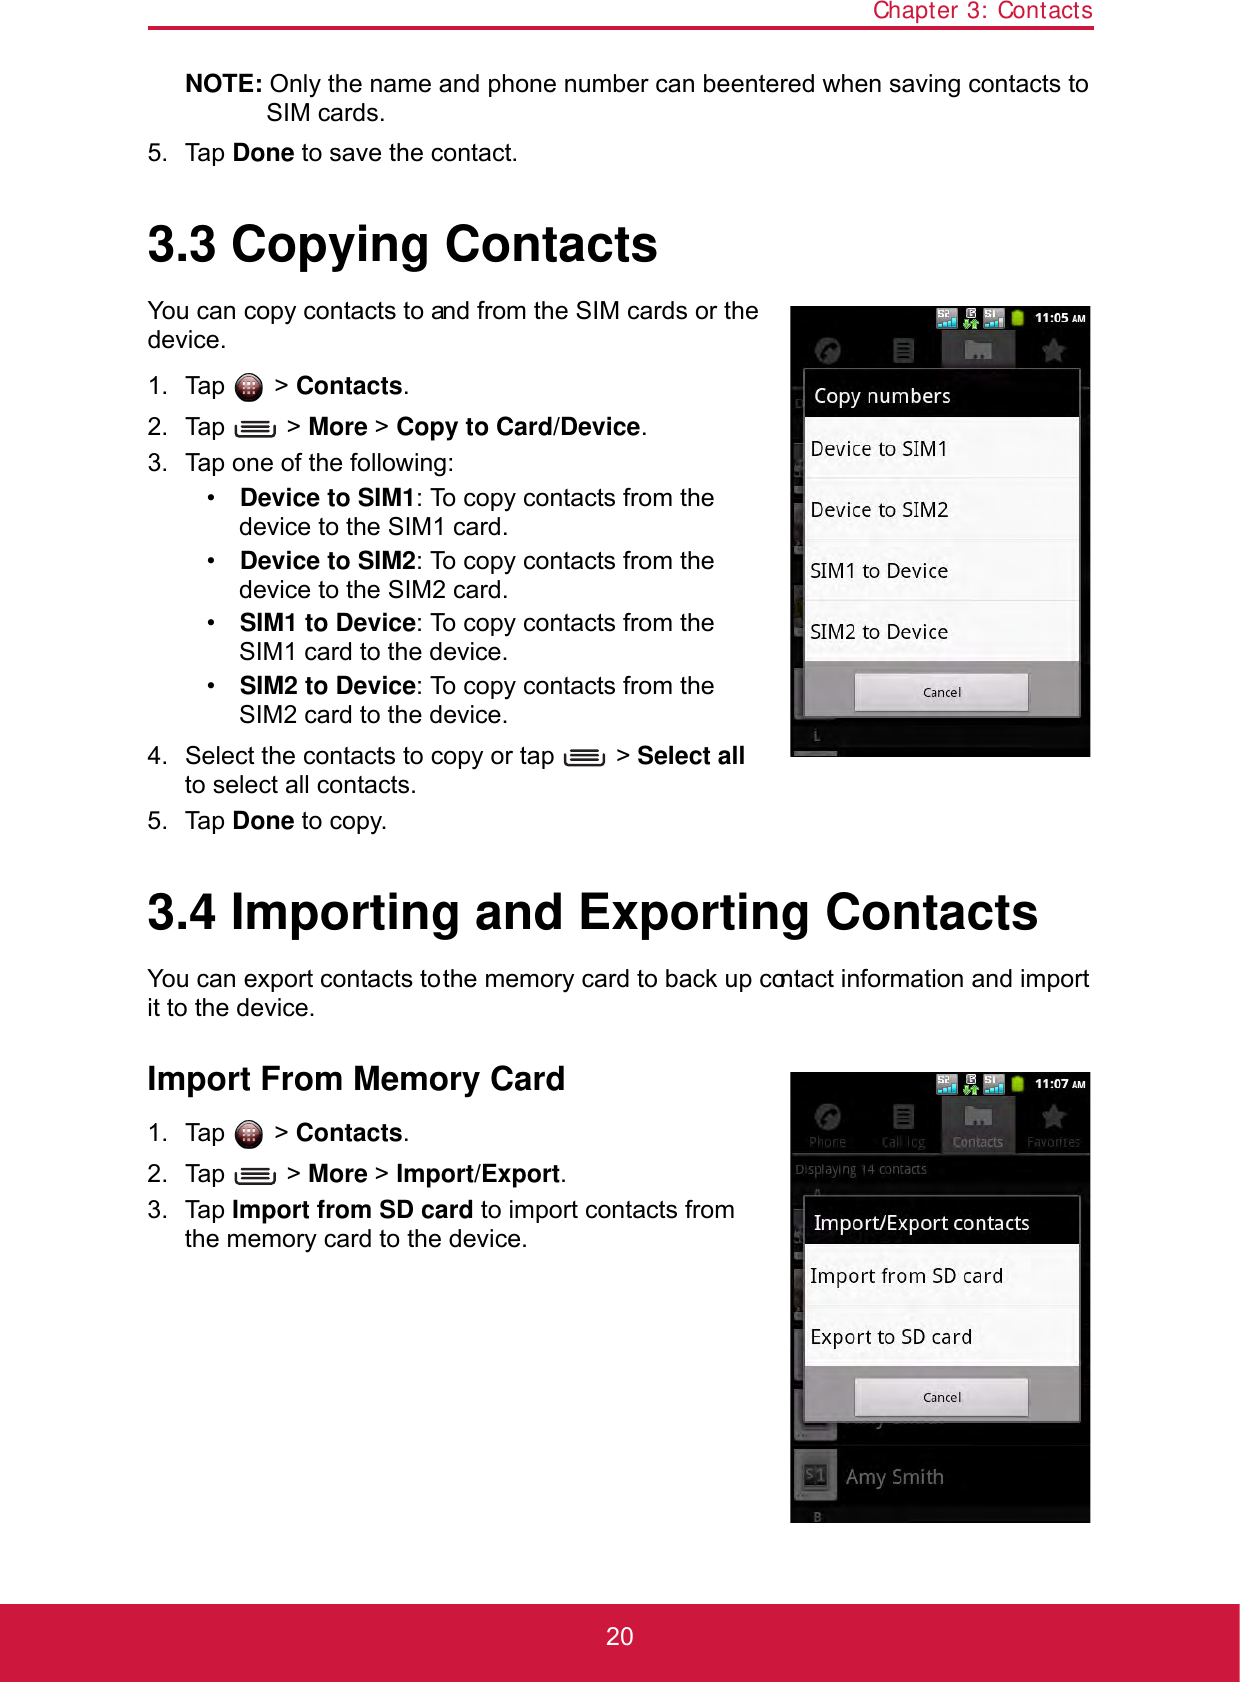 Chapter 3: Contacts20NOTE: Only the name and phone number can be entered when saving contacts to SIM cards.5. Tap Done to save the contact.3.3 Copying ContactsYou can copy contacts to and from the SIM cards or the device.1. Tap  &gt; Contacts.2. Tap  &gt; More &gt; Copy to Card/Device.3. Tap one of the following:•Device to SIM1: To copy contacts from the device to the SIM1 card.•Device to SIM2: To copy contacts from the device to the SIM2 card.•SIM1 to Device: To copy contacts from the SIM1 card to the device.•SIM2 to Device: To copy contacts from the SIM2 card to the device.4. Select the contacts to copy or tap   &gt; Select all to select all contacts.5. Tap Done to copy.3.4 Importing and Exporting ContactsYou can export contacts to the memory card to back up contact information and import it to the device.Import From Memory Card1. Tap  &gt; Contacts.2. Tap  &gt; More &gt; Import/Export.3. Tap Import from SD card to import contacts from the memory card to the device.